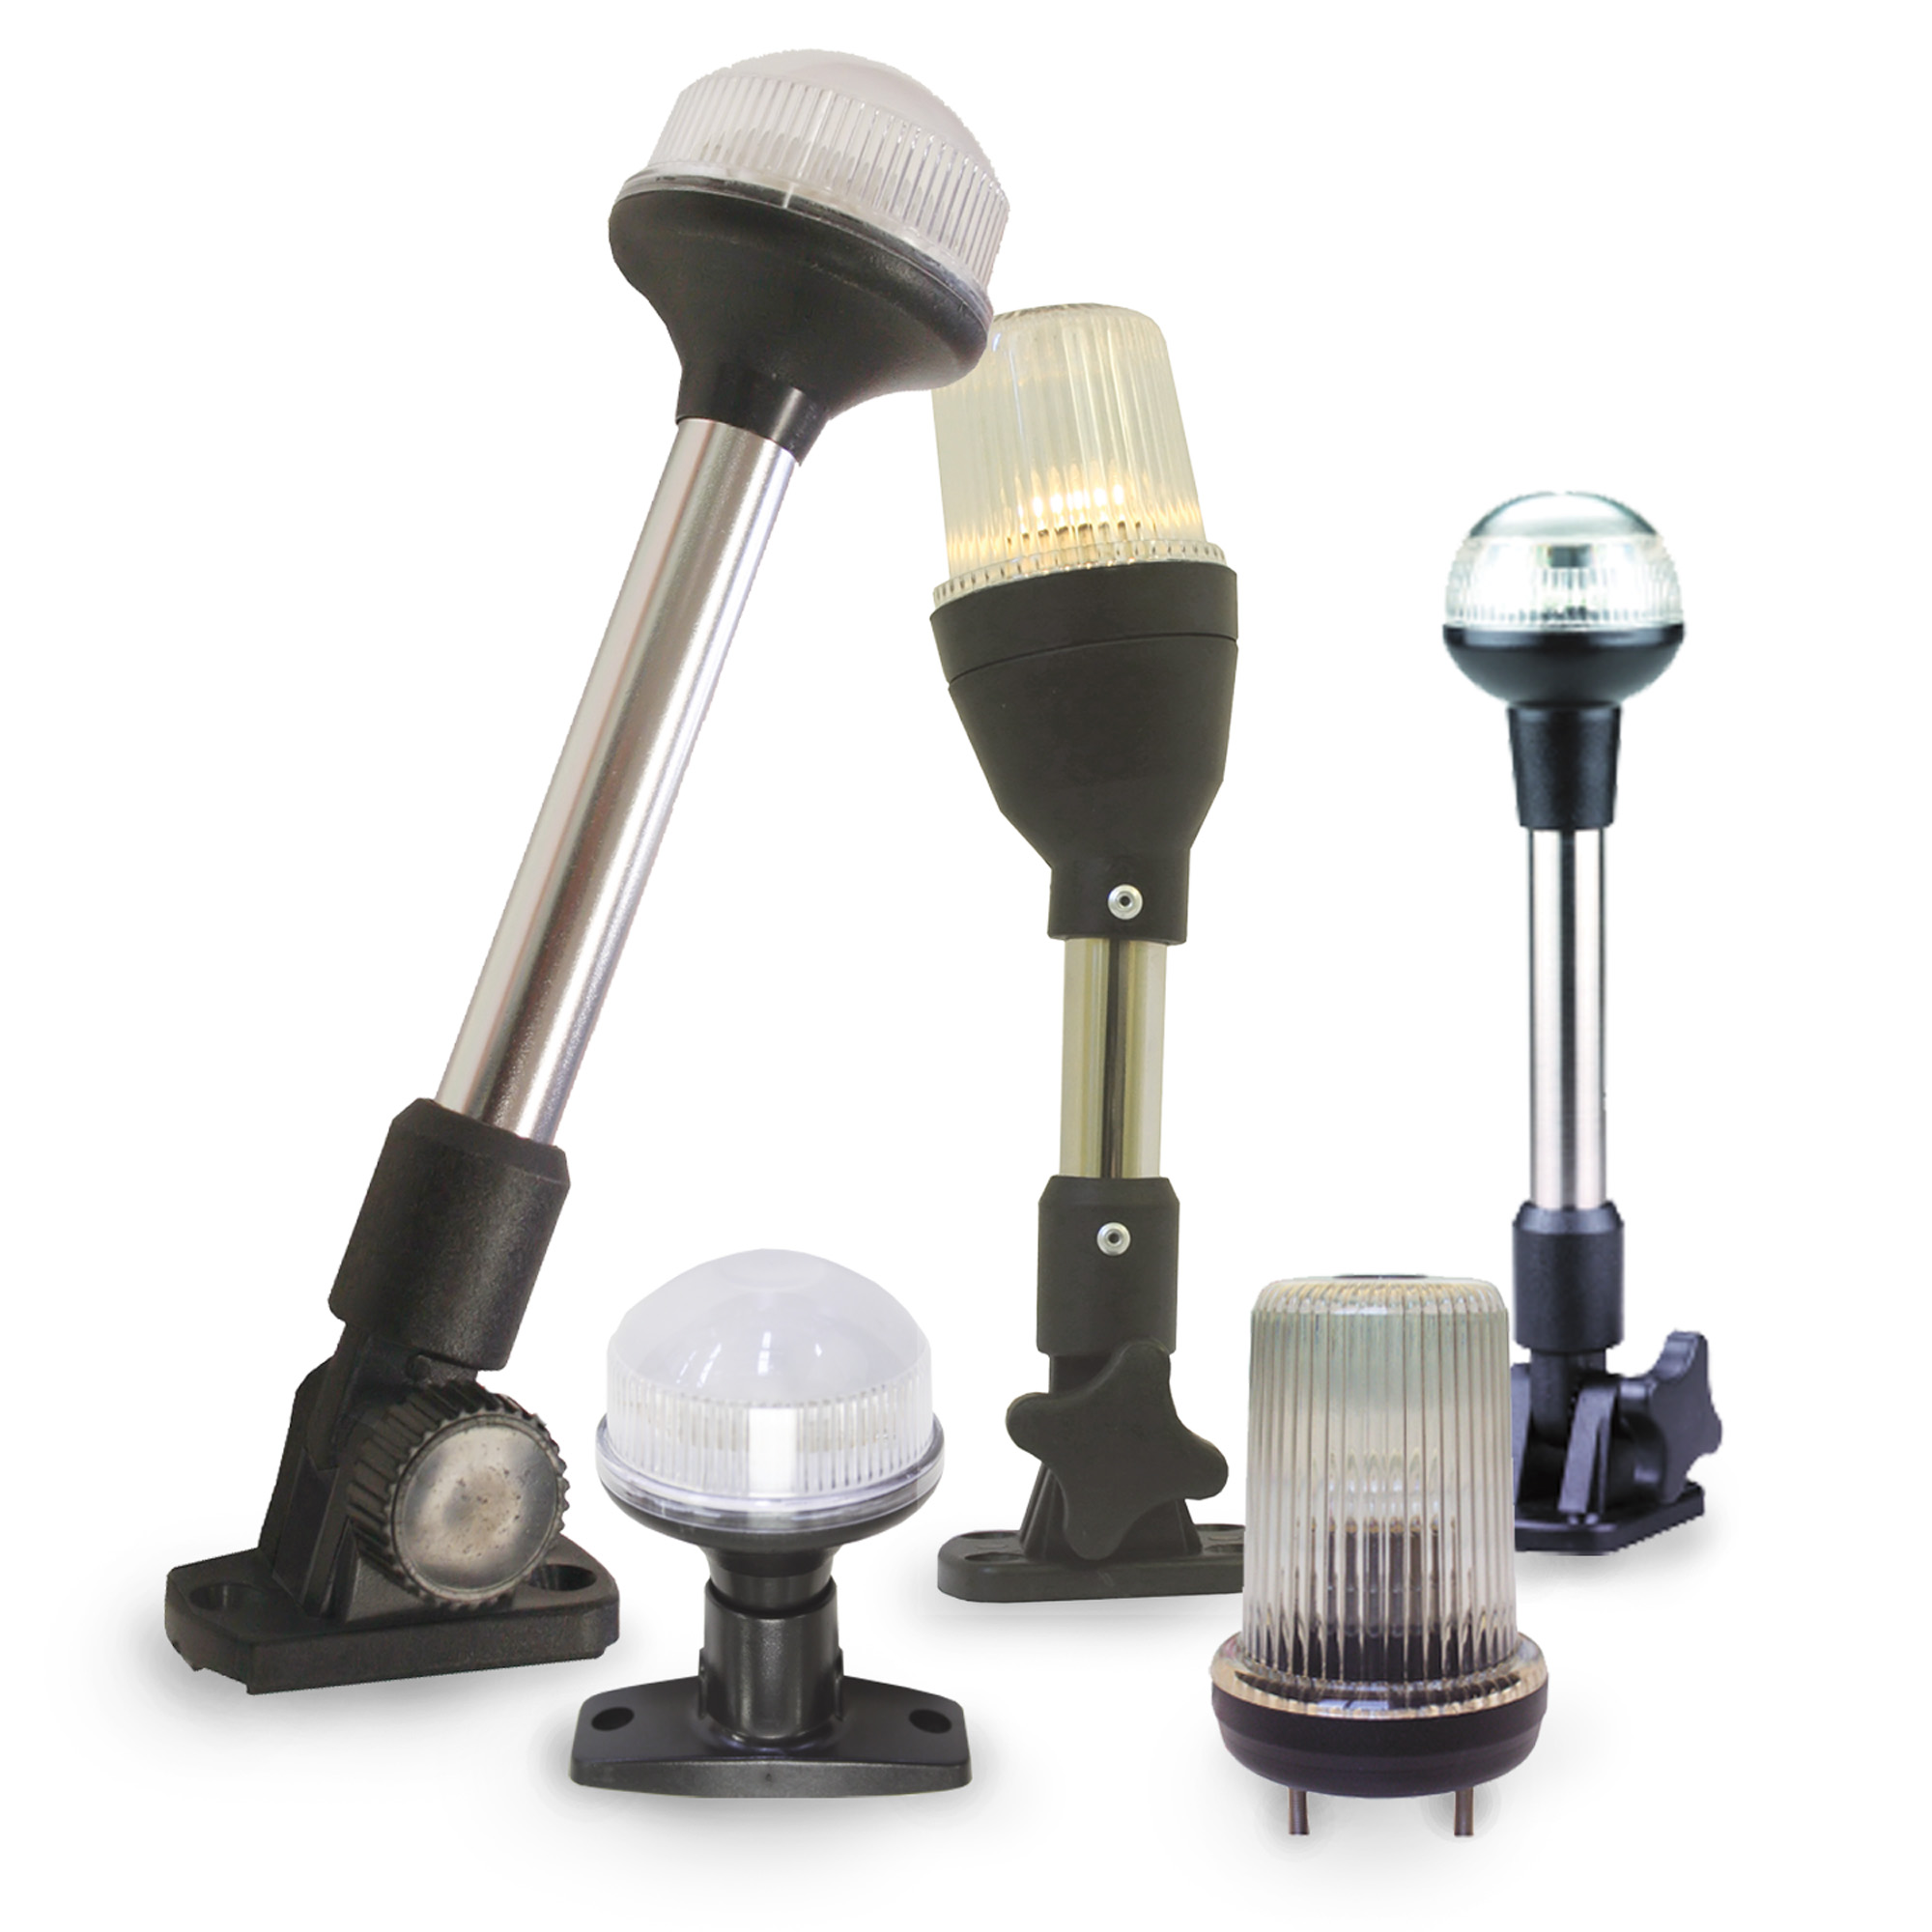 Product category - Anchor Lights